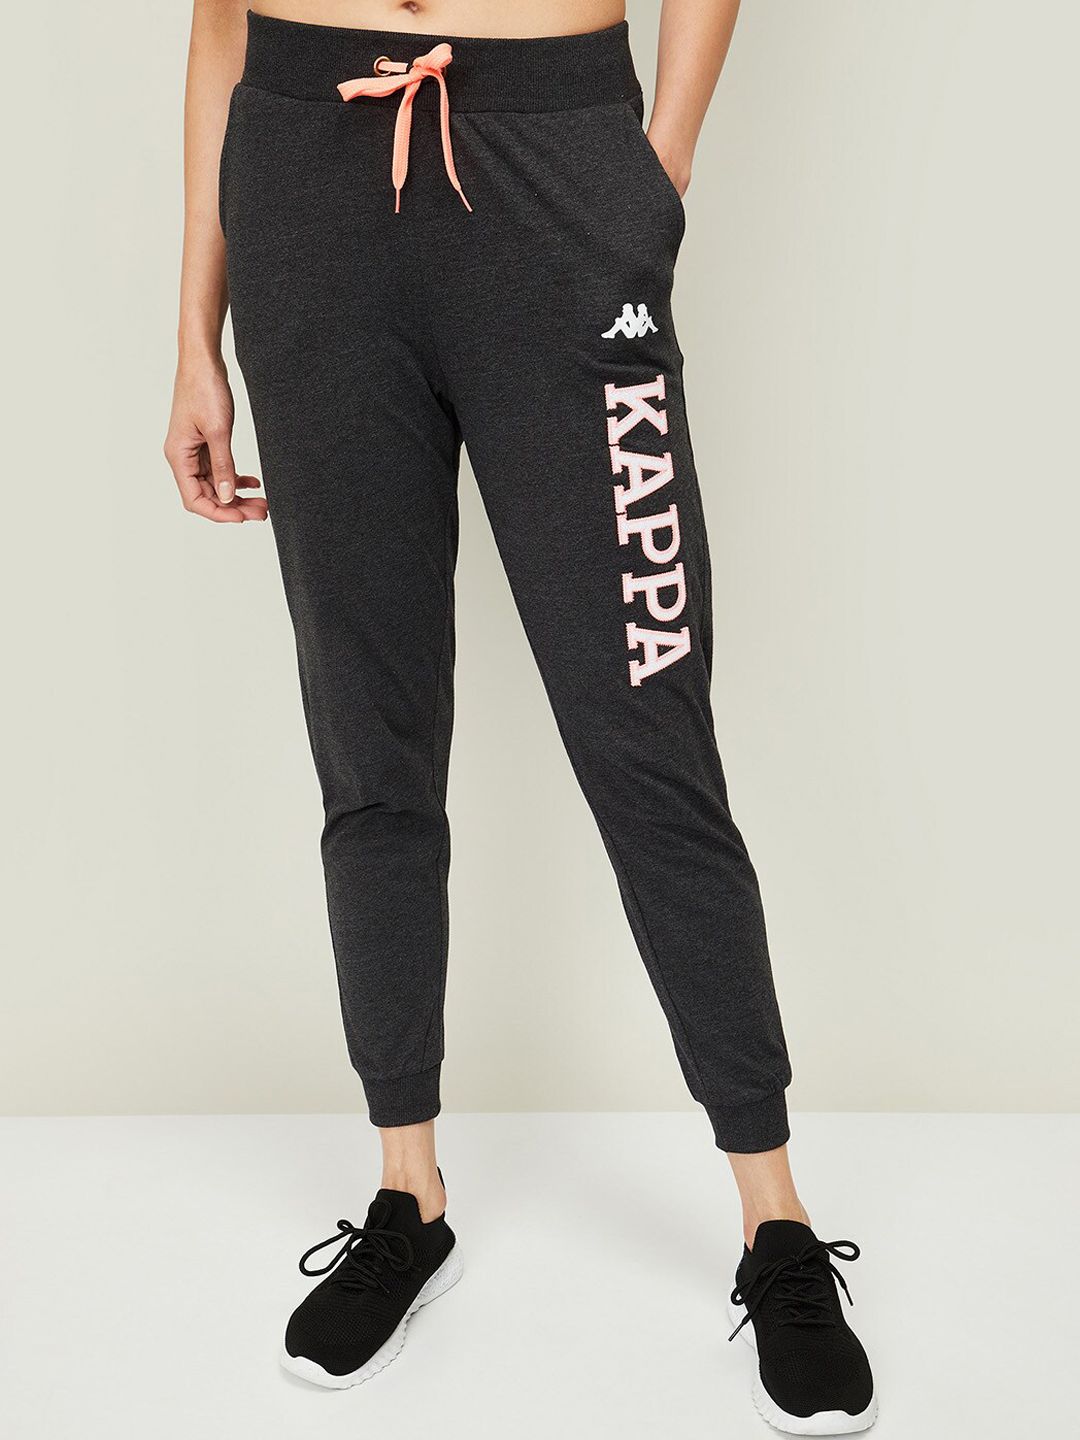 Kappa Women Black Solid Cotton Sports Joggers Price in India